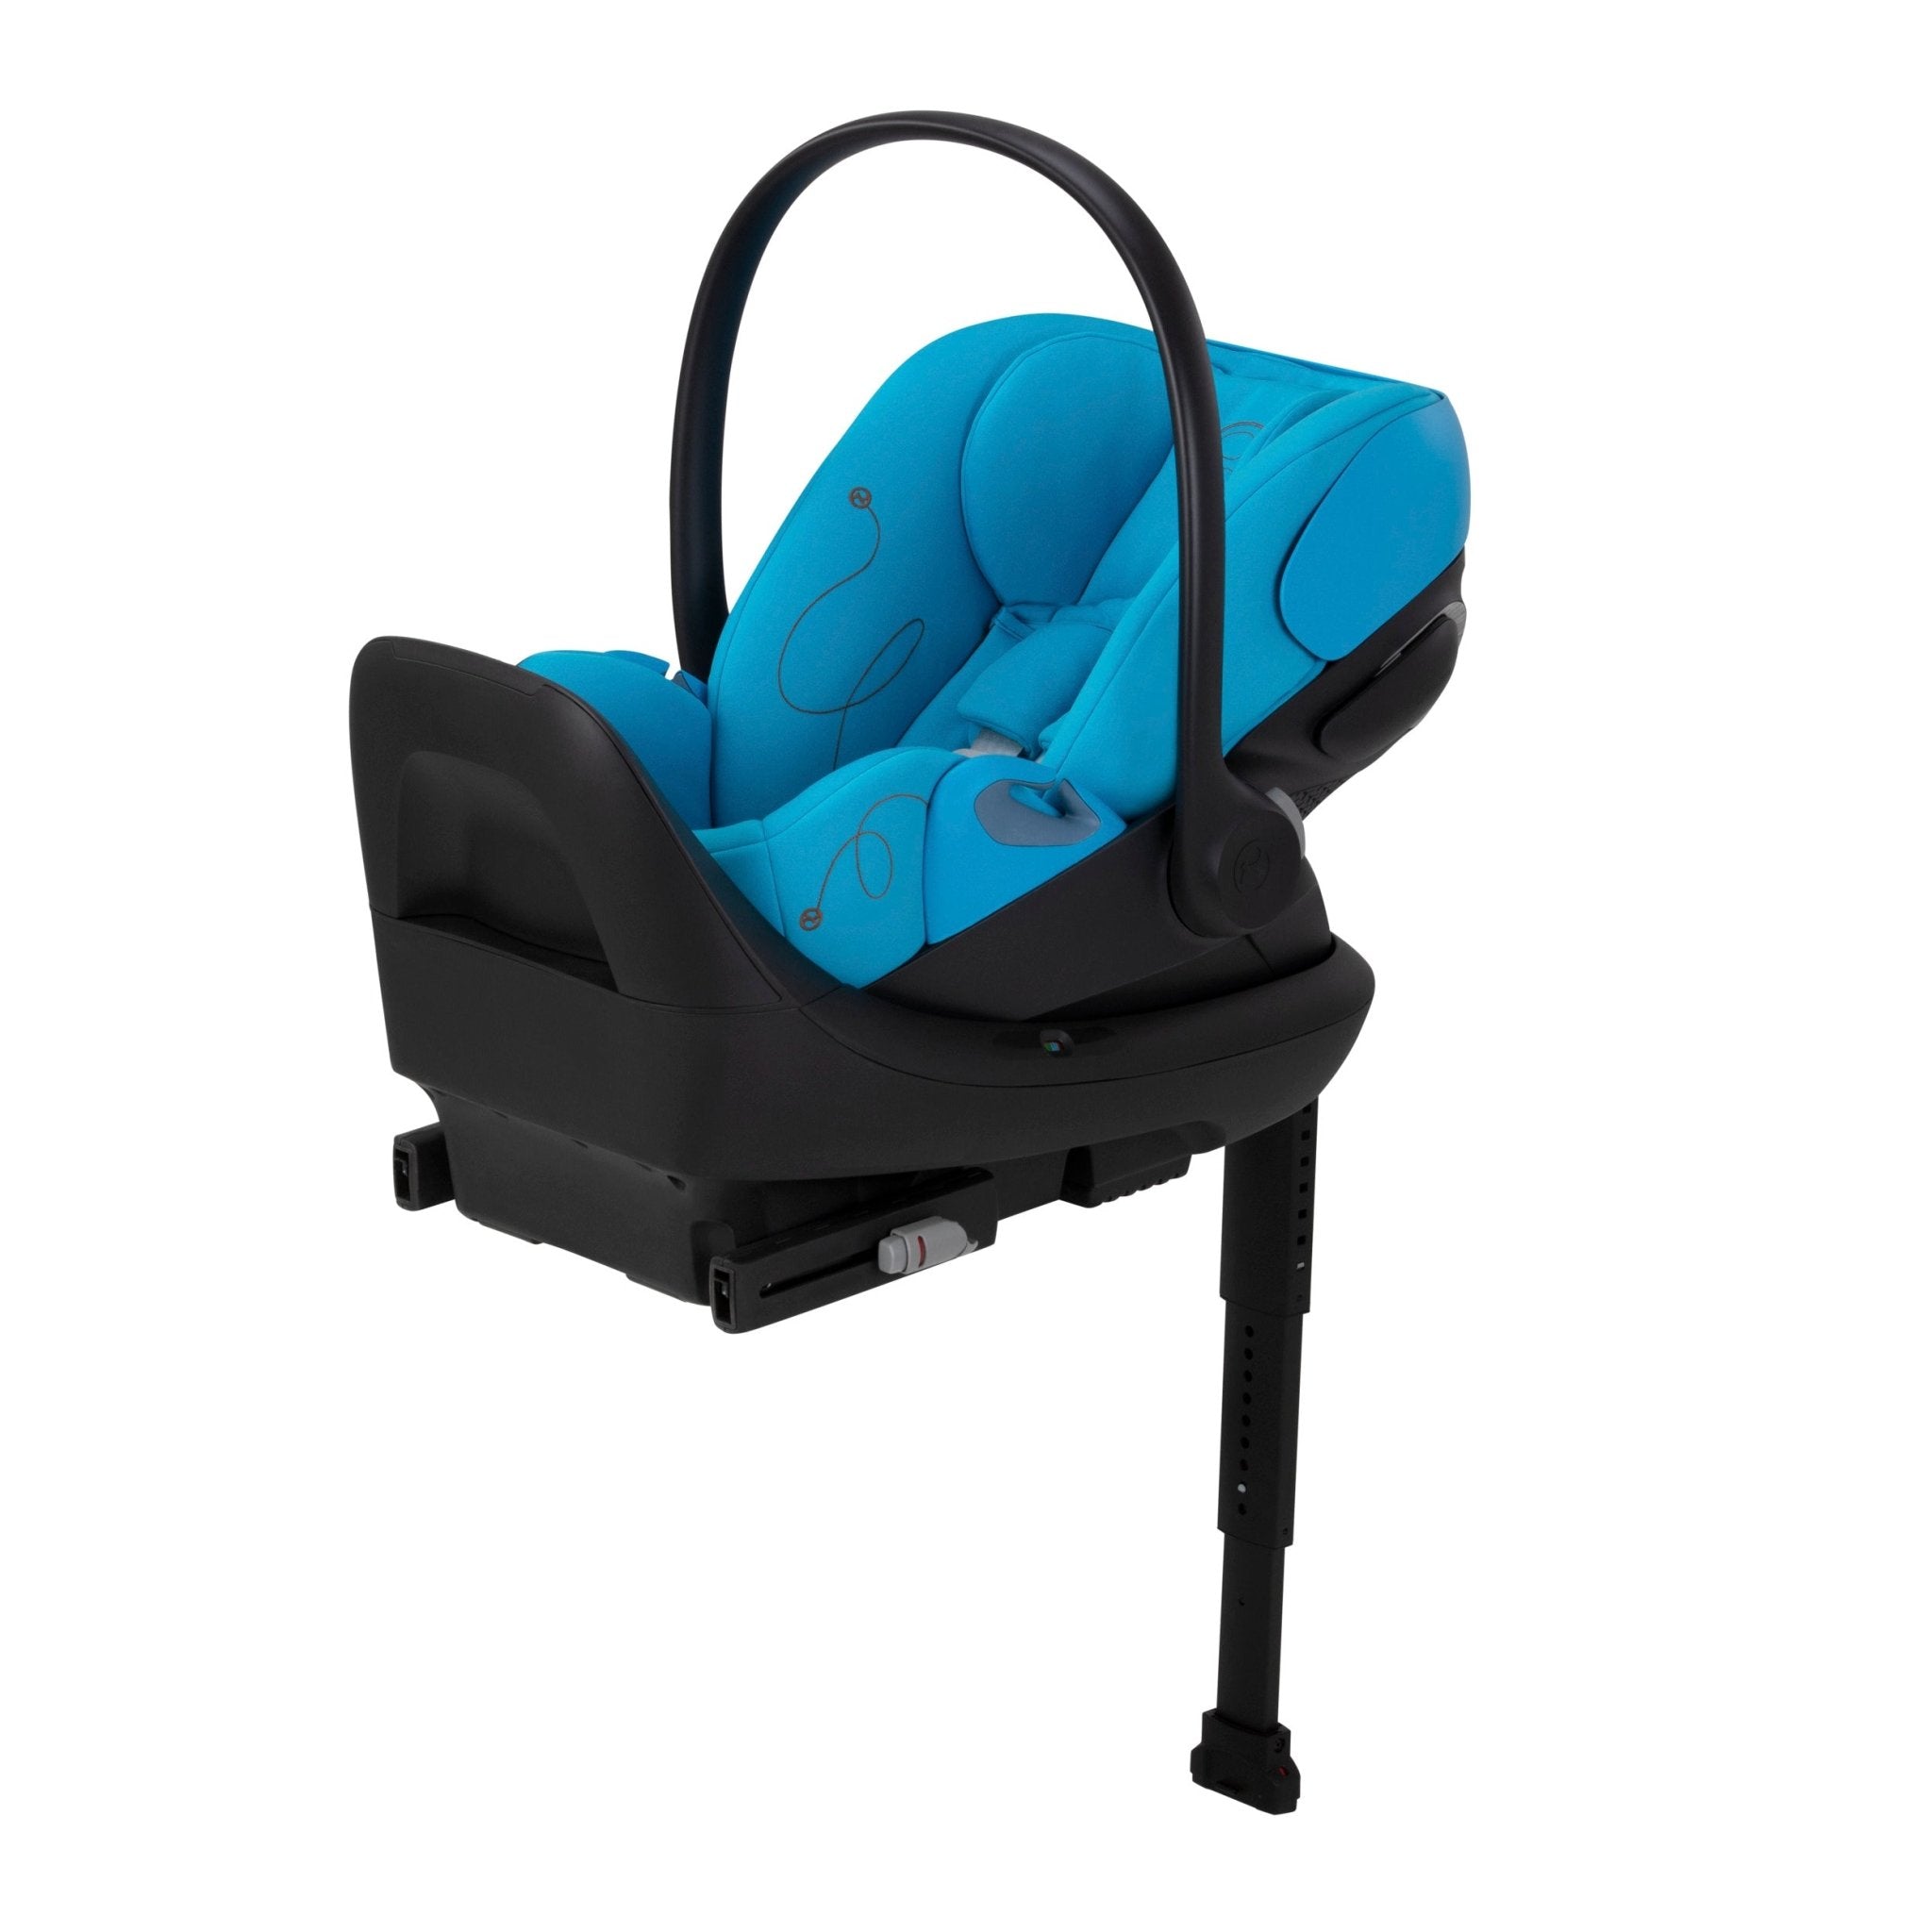 Cybex Cloud G Lux Infant Car Seat - ANB Baby -4063846282708$300 - $500